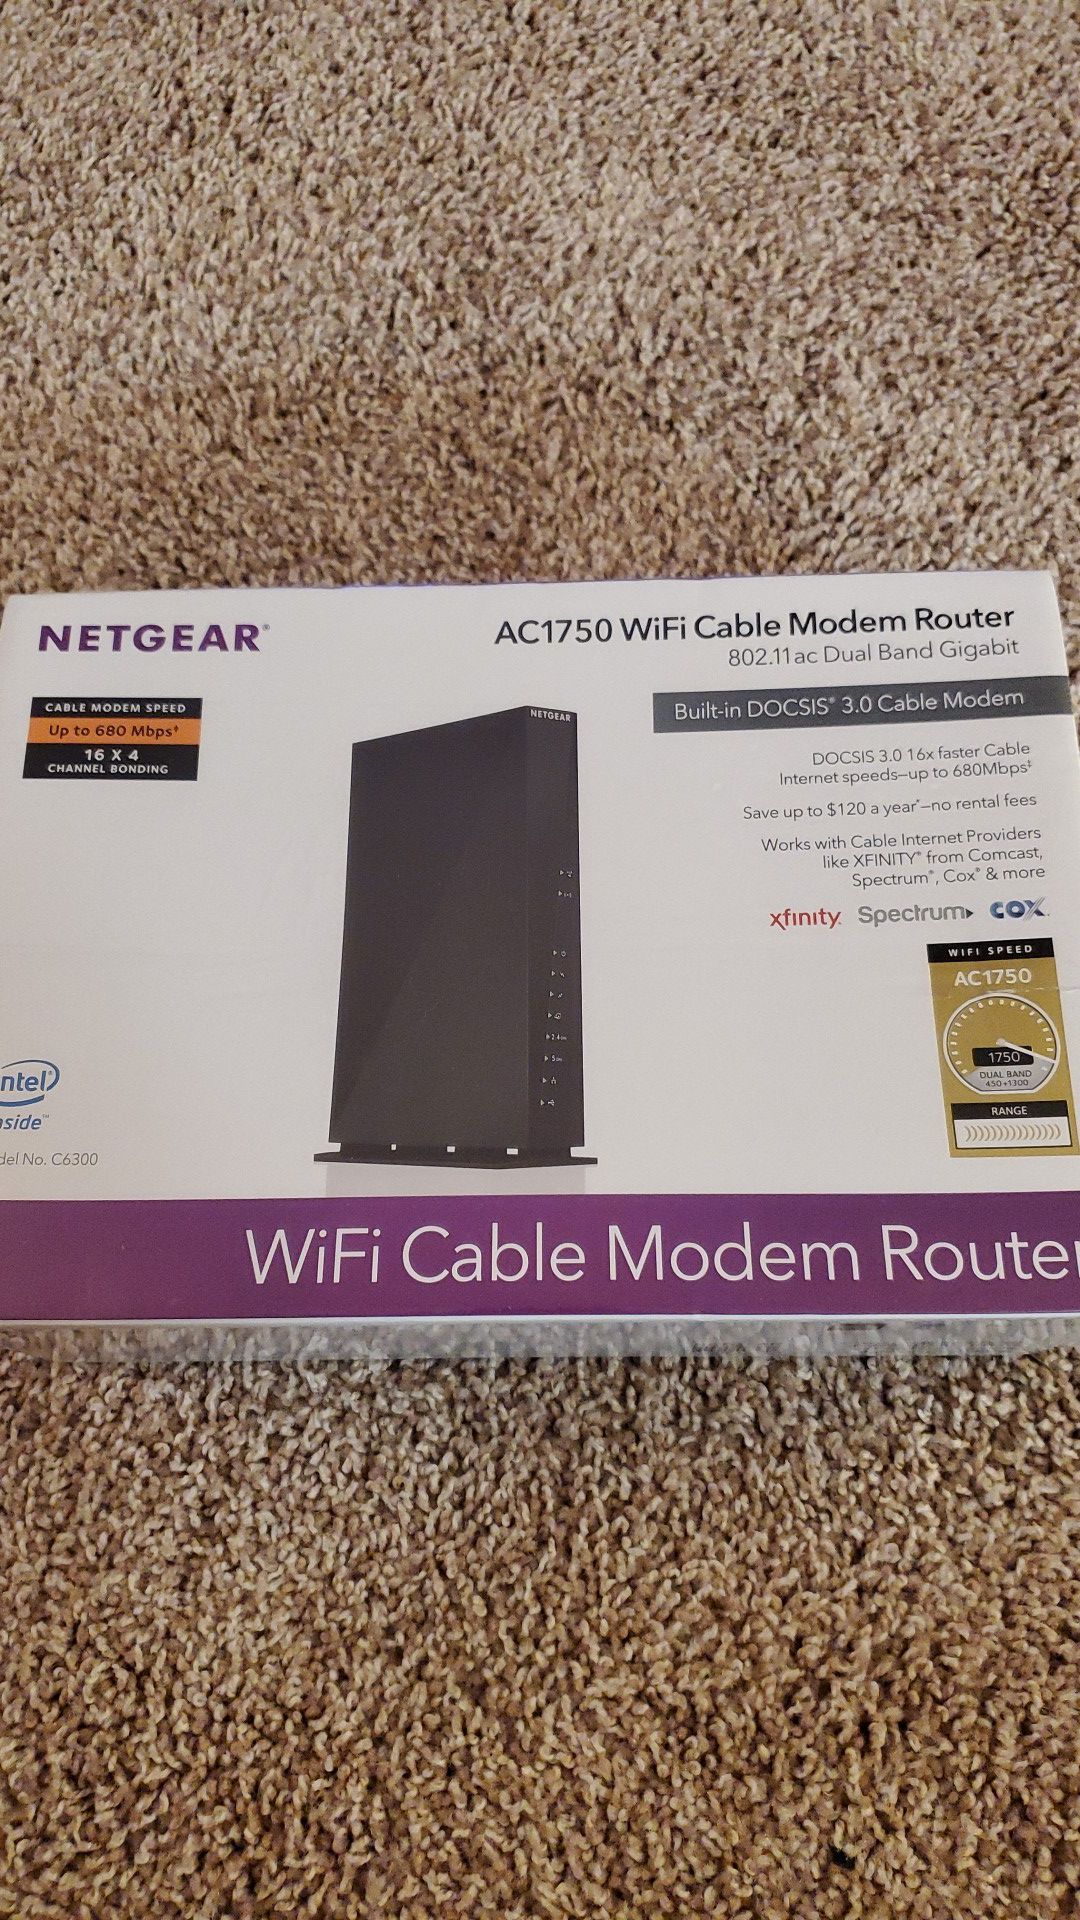 Netgear C6300-100NAS AC1750 (16x4) DOCSIS 3.0 WiFi Cable Modem Router Combo (C6300) Certified for Xfinity from Comcast